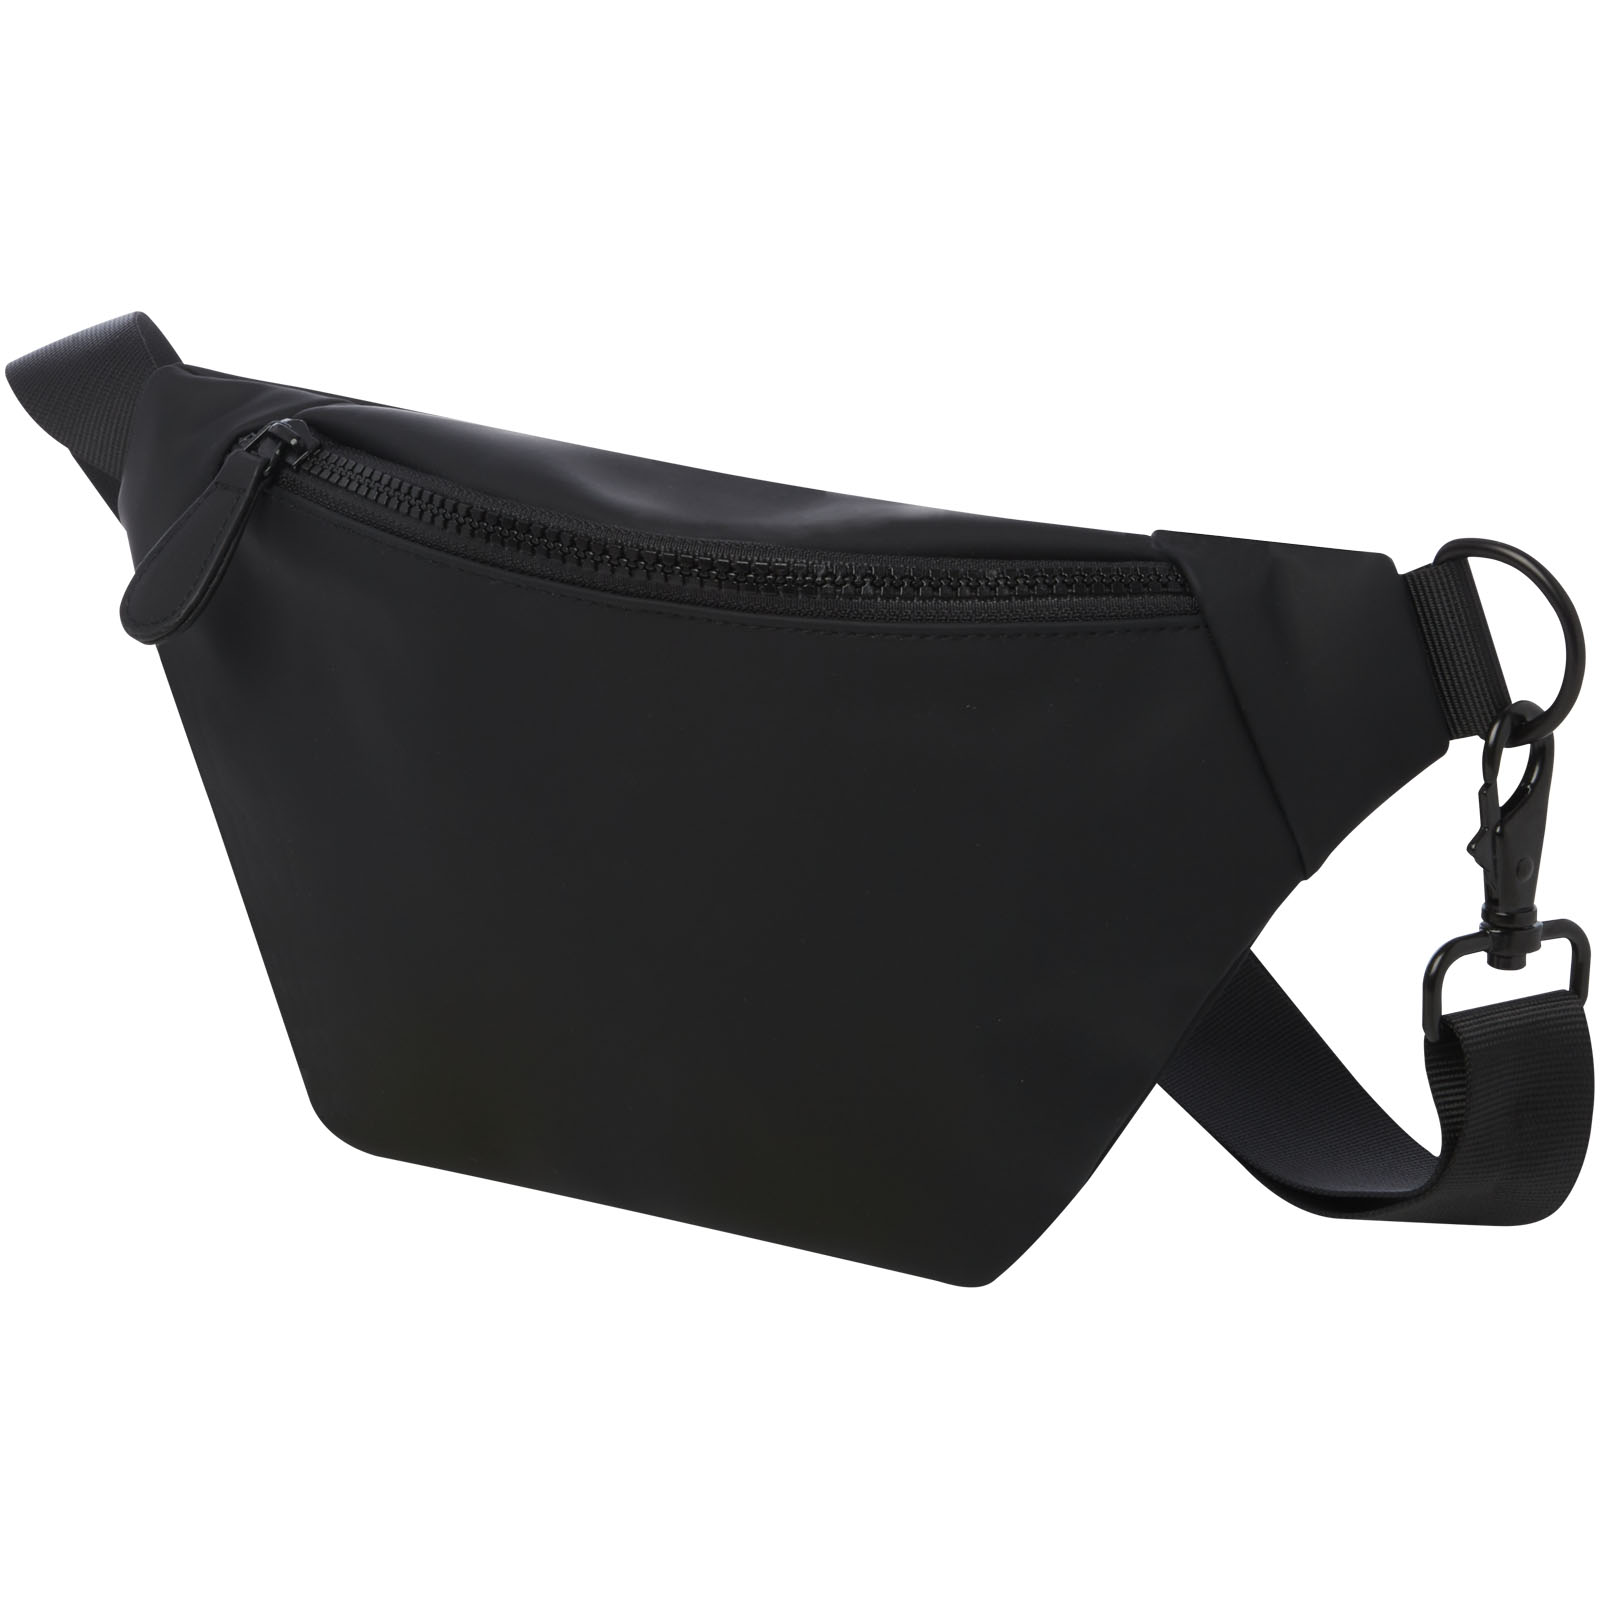 Travel Accessories - Turner fanny pack